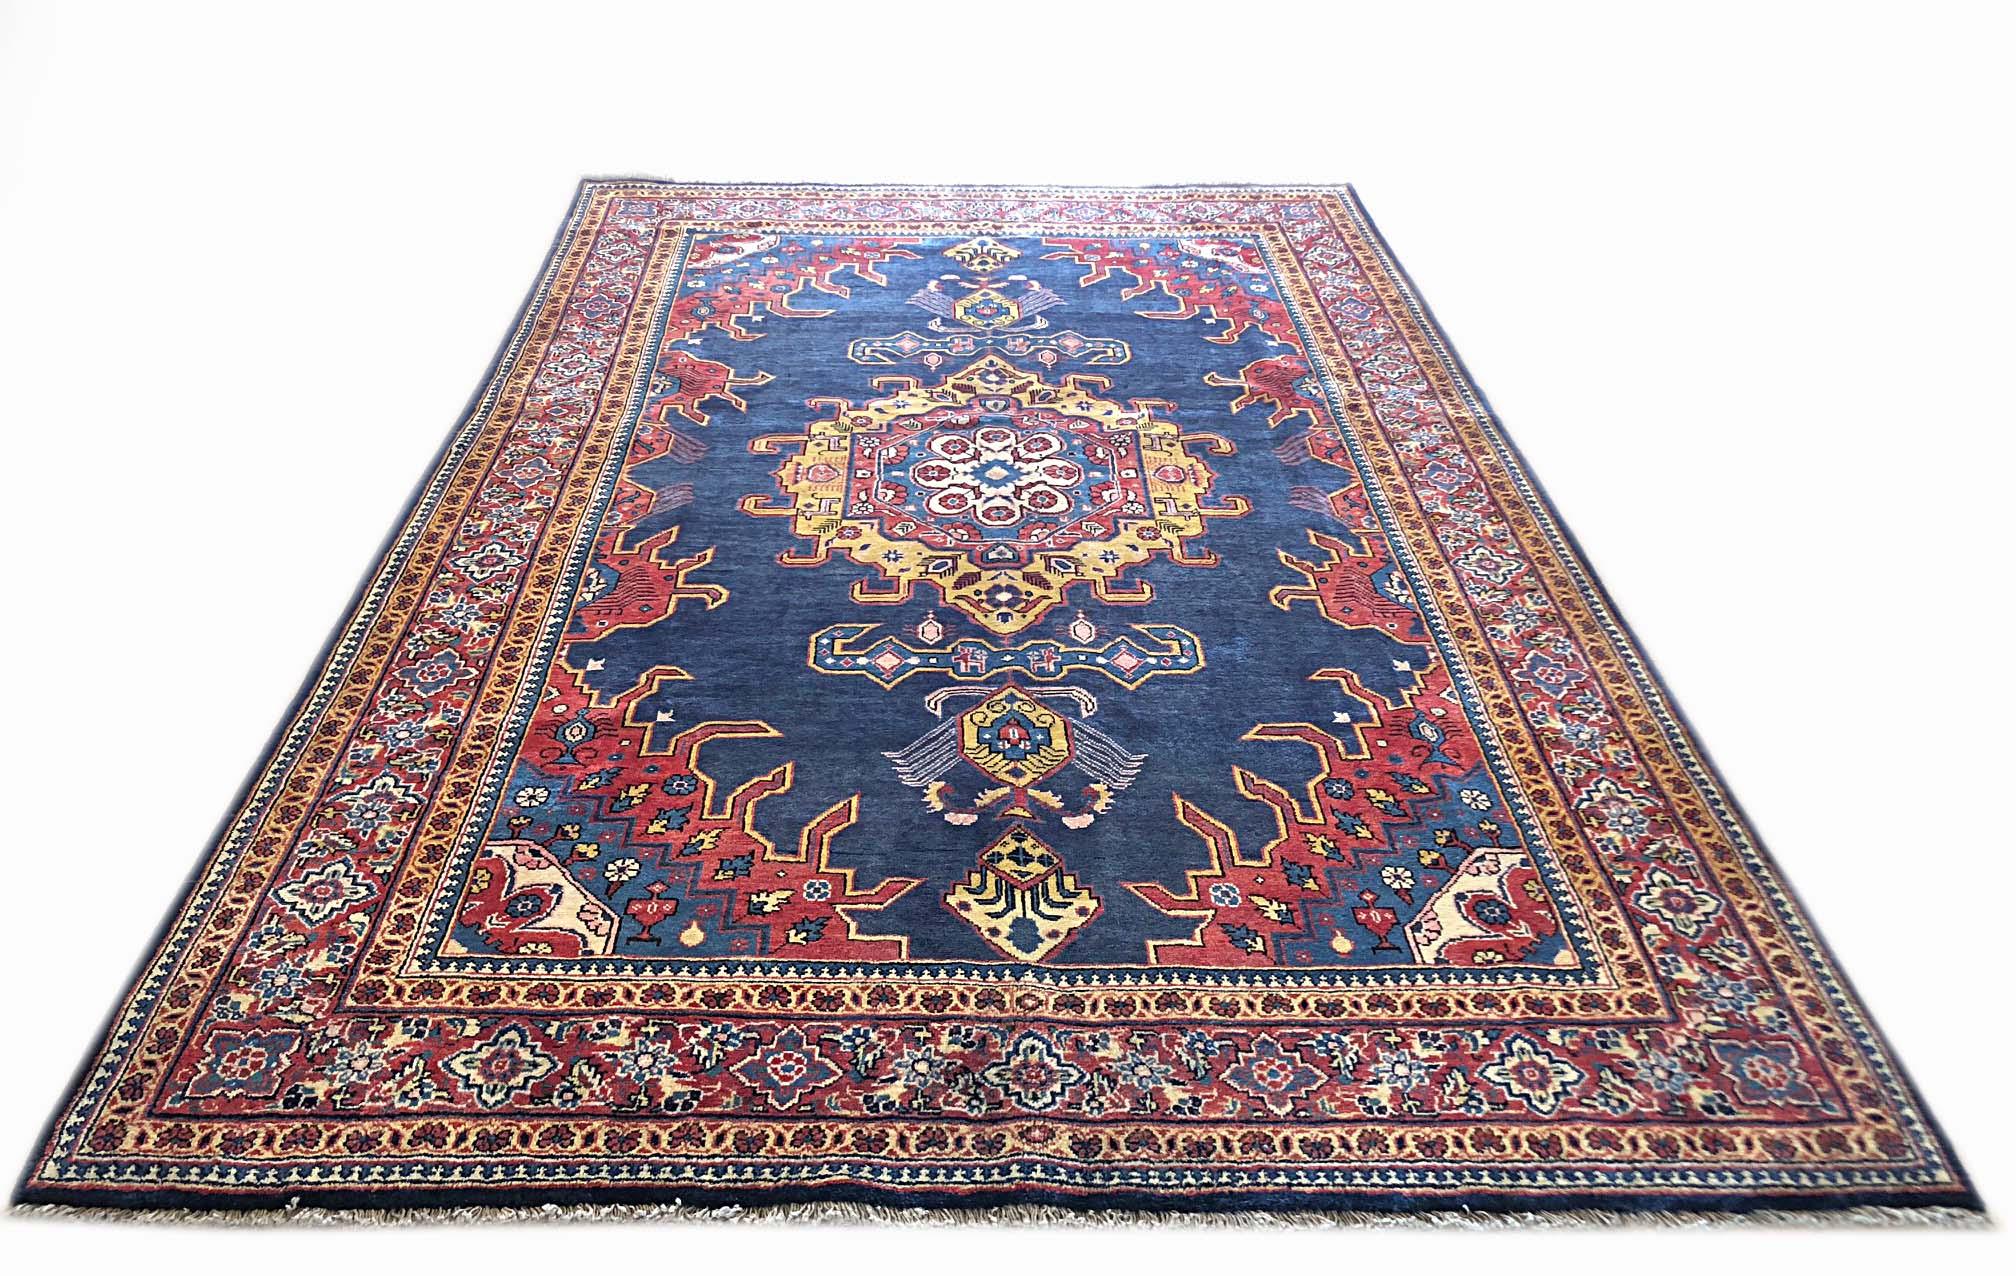 This authentic Persian Viss rug has wool pile and cotton foundation. The age of this rug is almost 50 years old. The base color is blue and the border color is rust. This beautiful piece has a hexagonal shape medallion. The size of this rug is 7